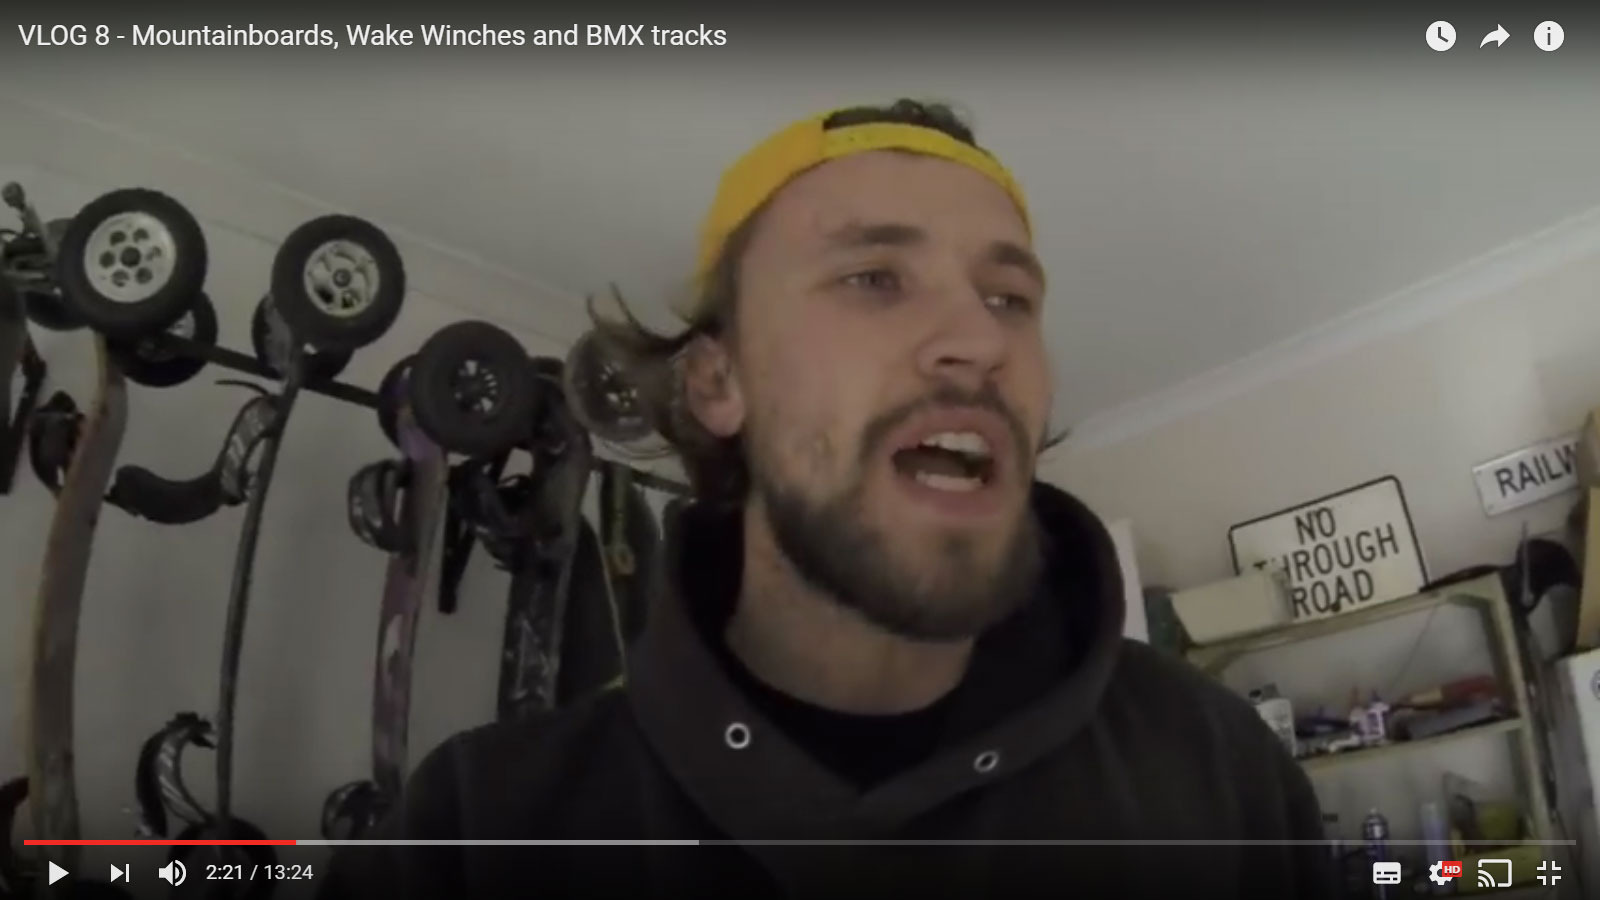 Vlog 8 – Mountainboards, Wake Winches and BMX tracks